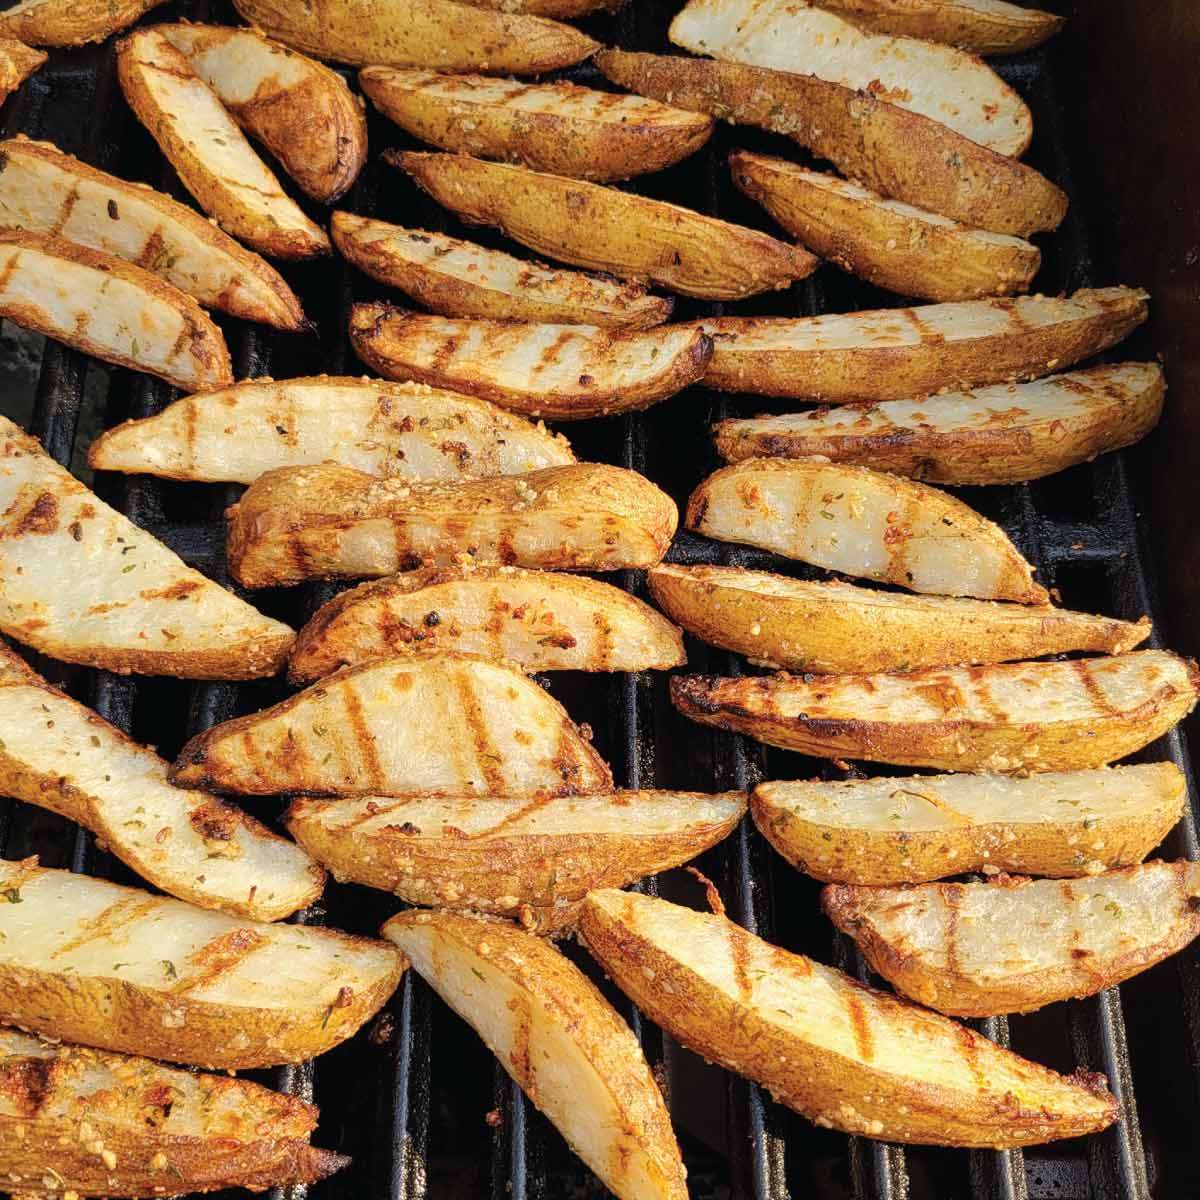 Seasoned wedges on the grill after flipping to cook on the other side.